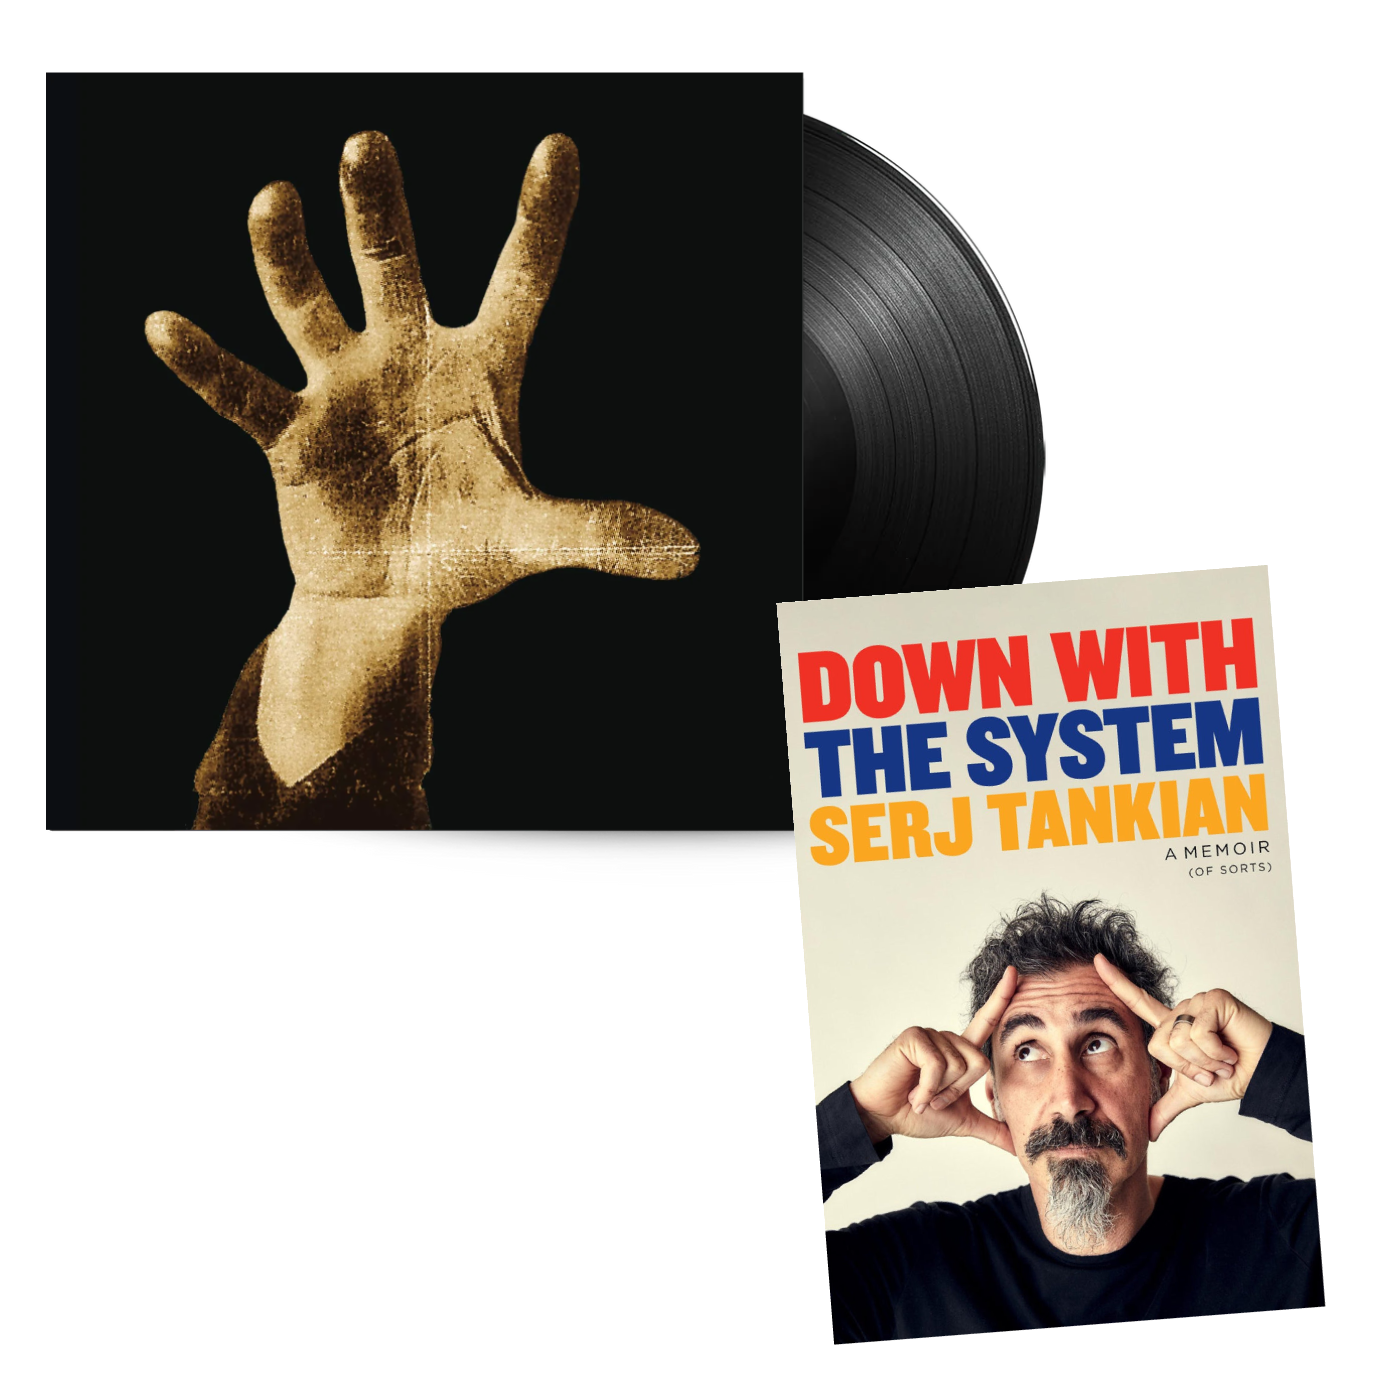 System of a Down: Vinyl LP & Signed Down With The System Book